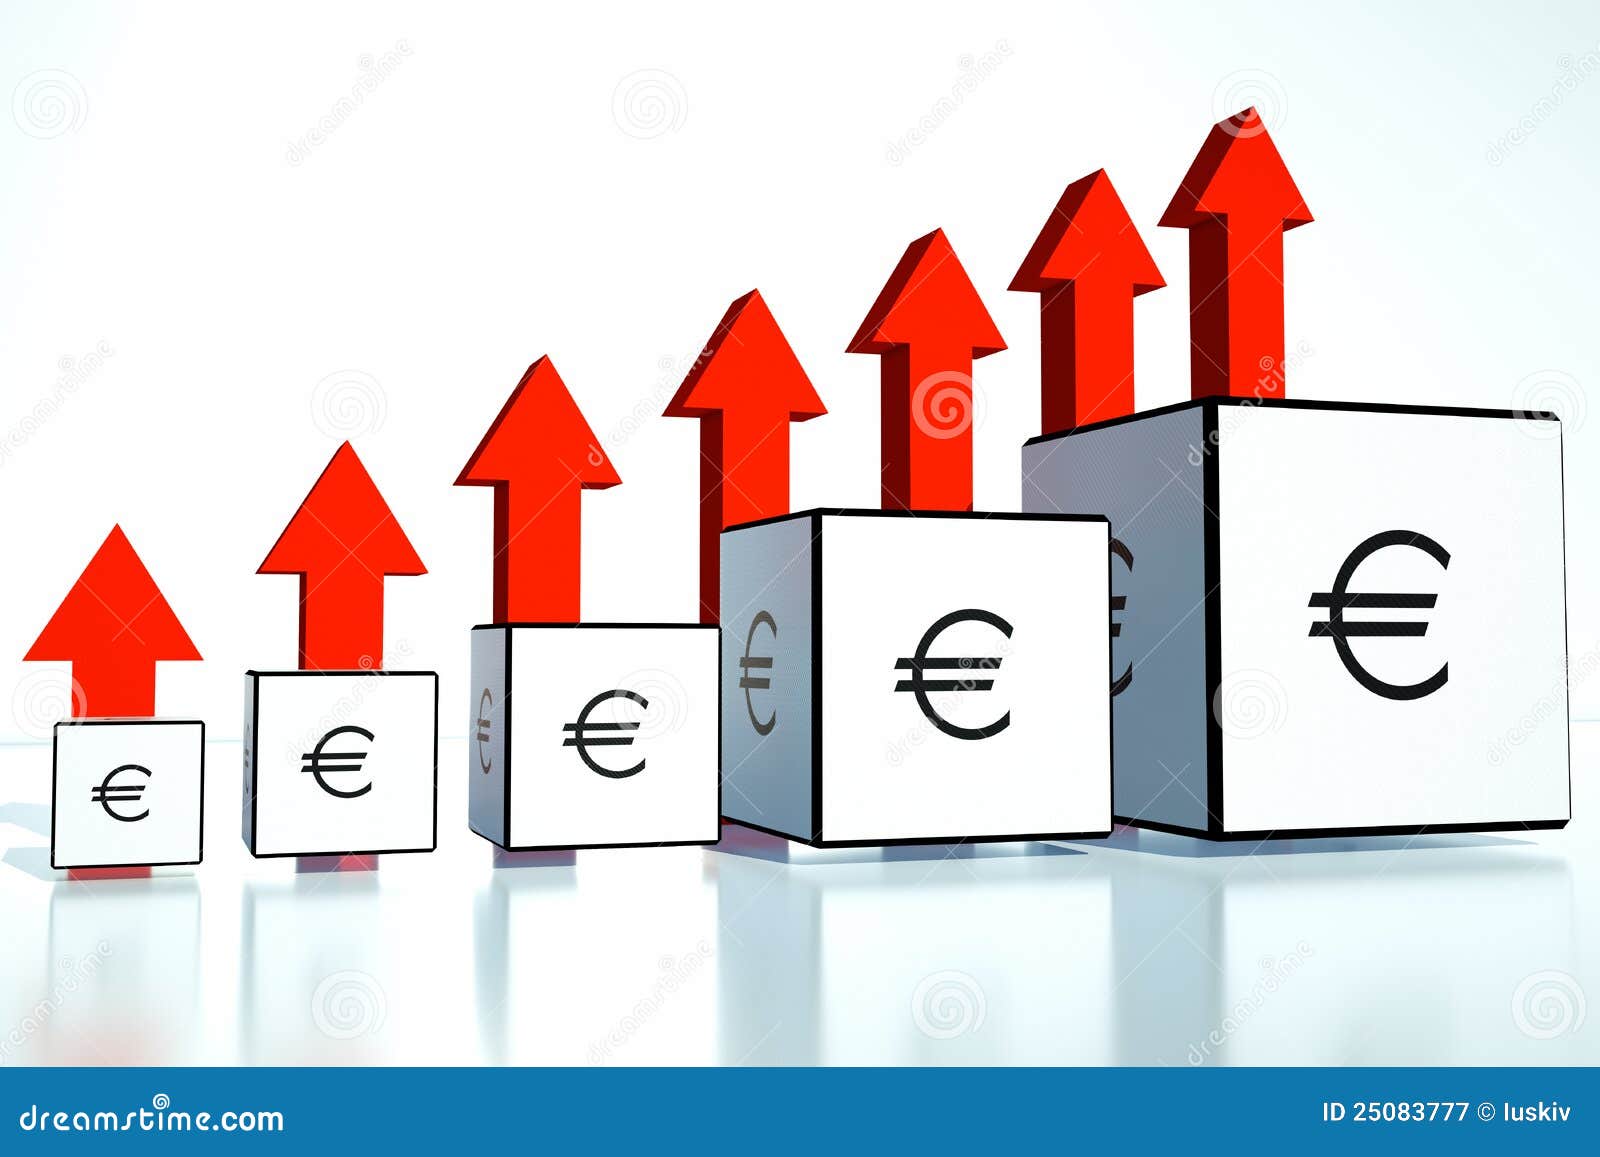 rate increases in the euro in financial position